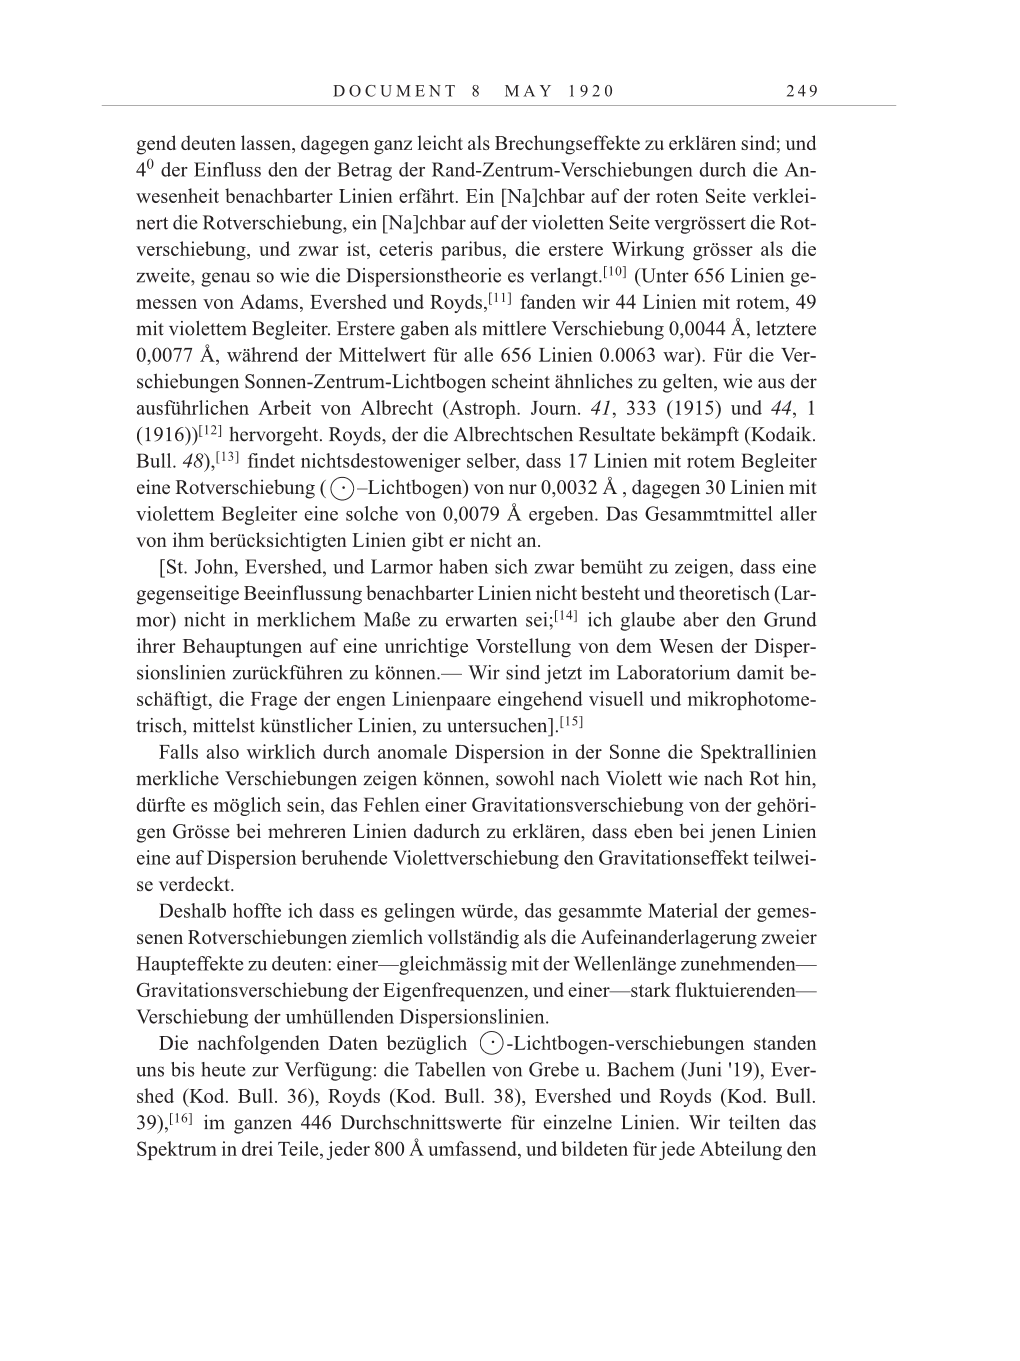 Volume 10: The Berlin Years: Correspondence May-December 1920 / Supplementary Correspondence 1909-1920 page 249